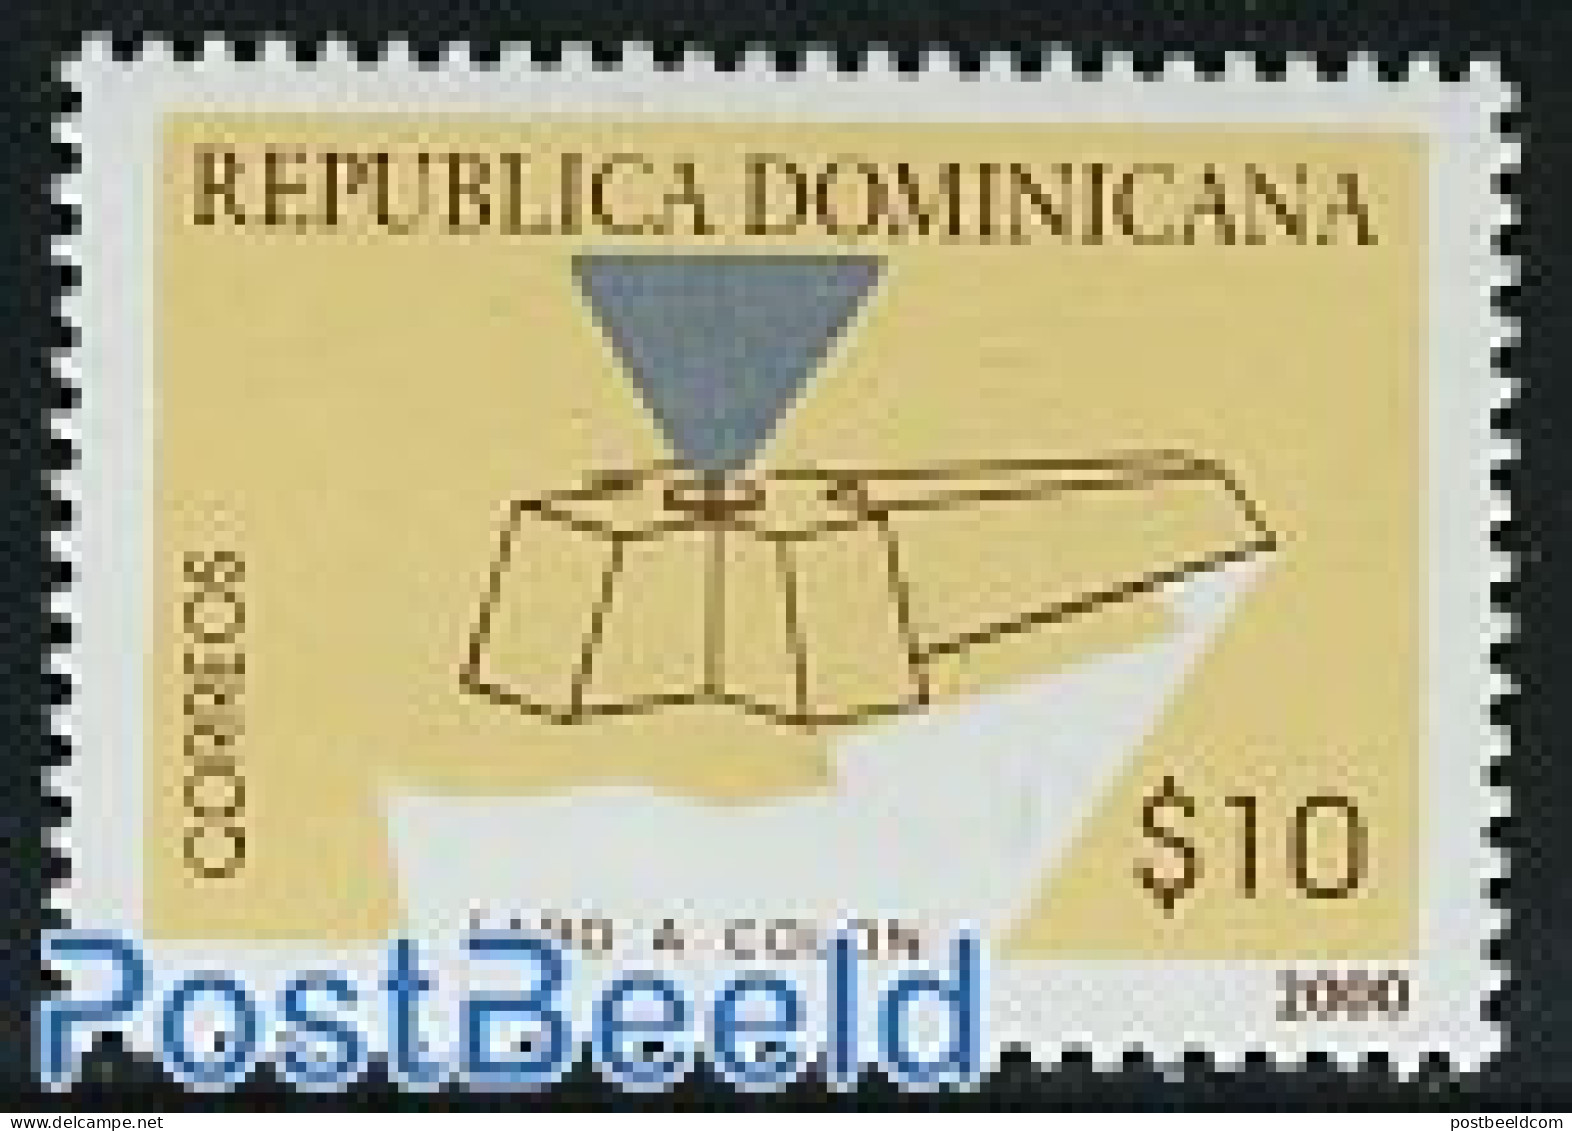 Dominican Republic 2000 Columbus Lighthouse 1v (yellow/silver), Mint NH, Various - Lighthouses & Safety At Sea - Faros